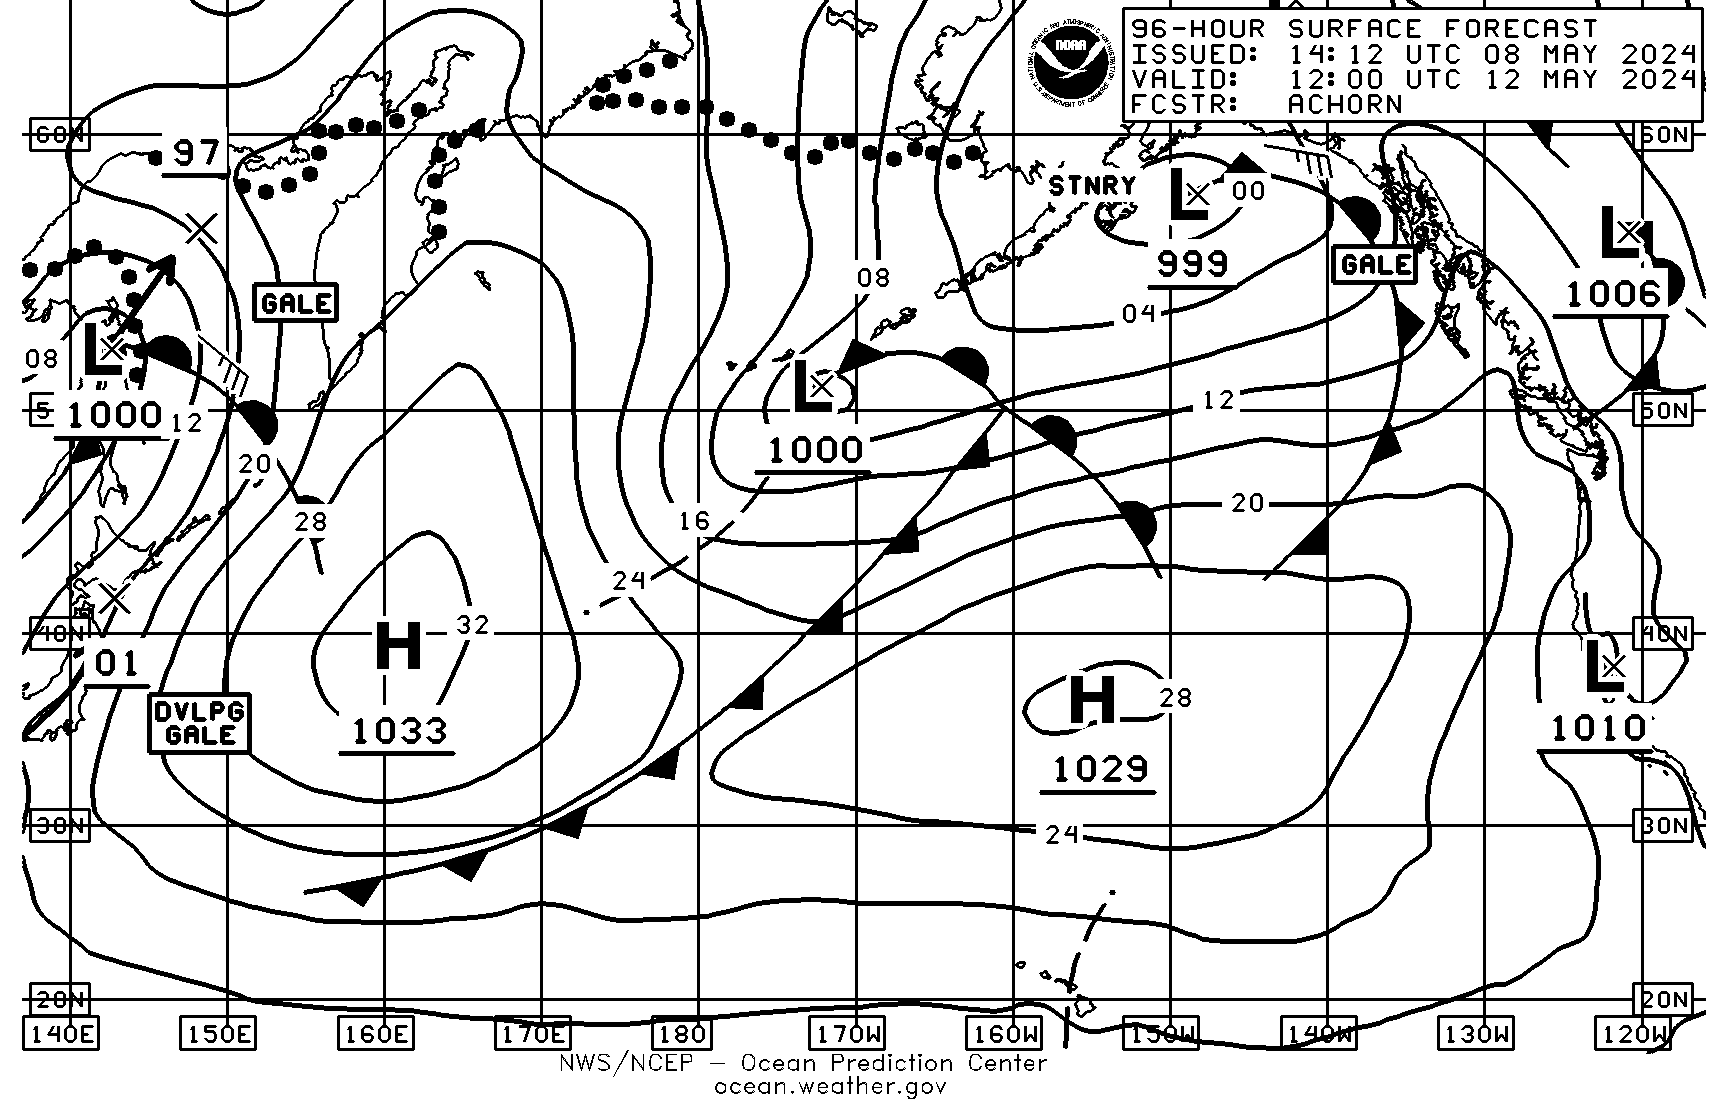 Image of 96-Hour Surface Forecasts